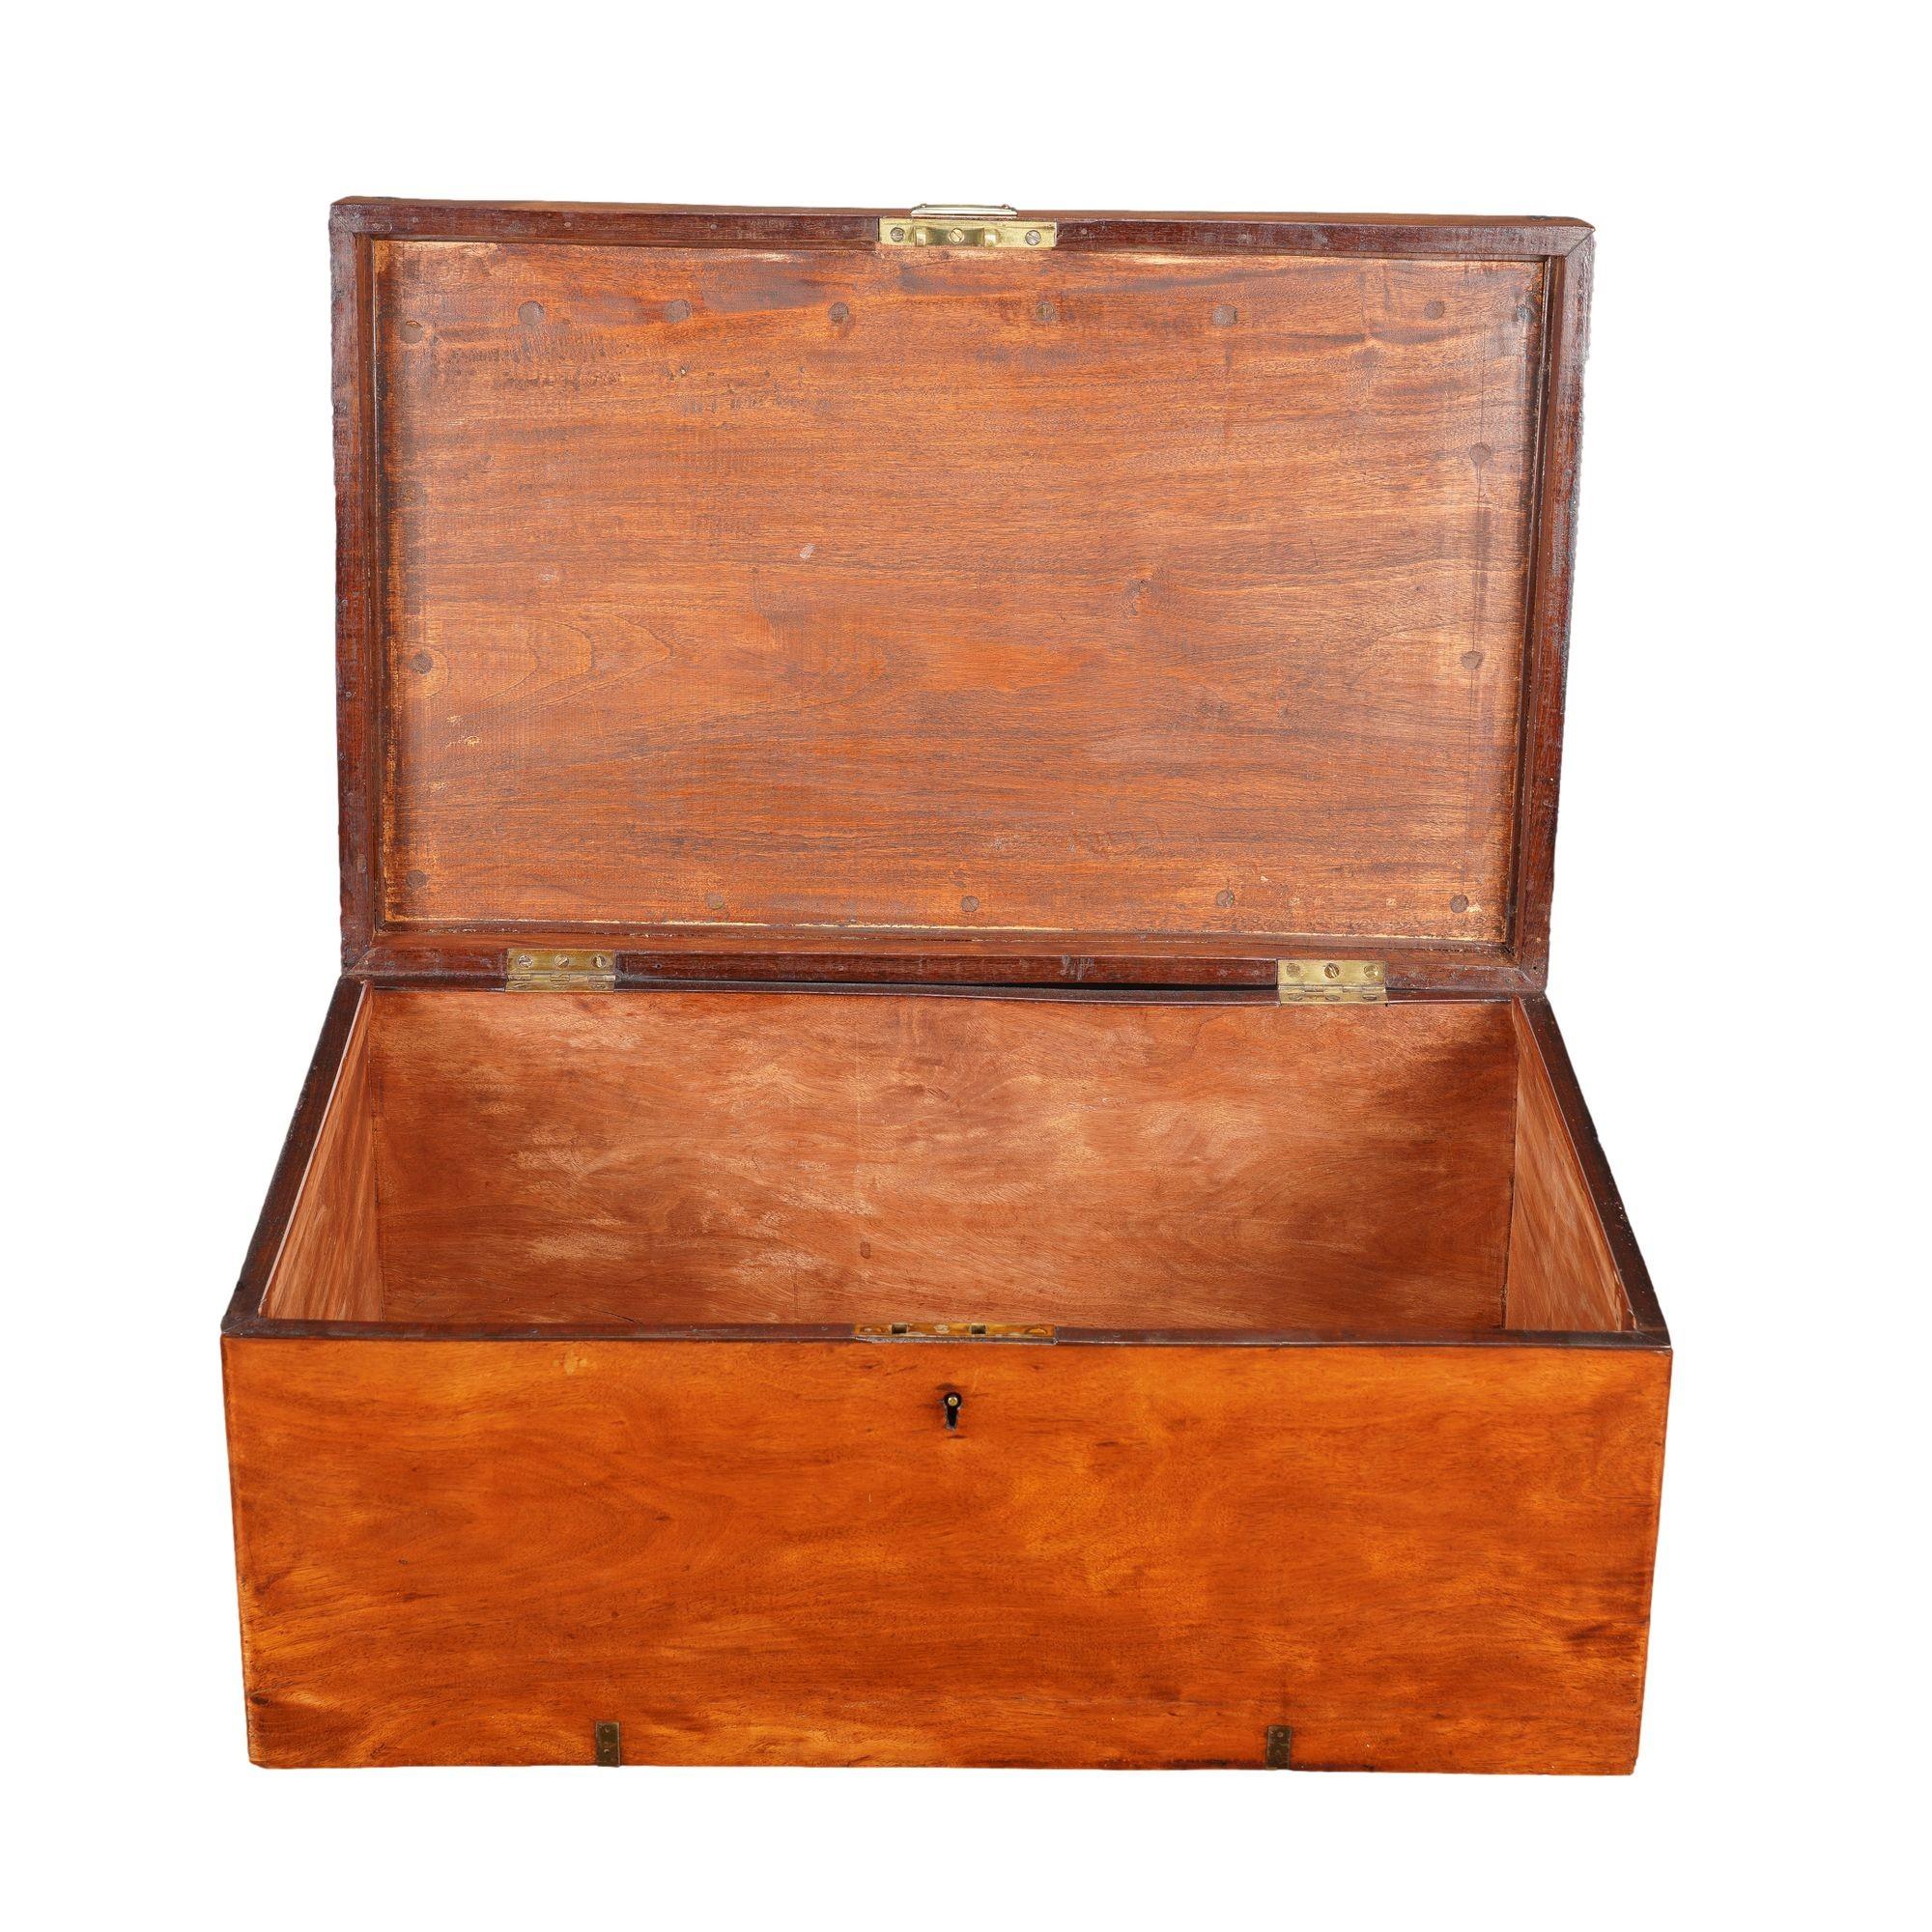 British officer’s trunk in mahogany and brass, 1830 For Sale 5